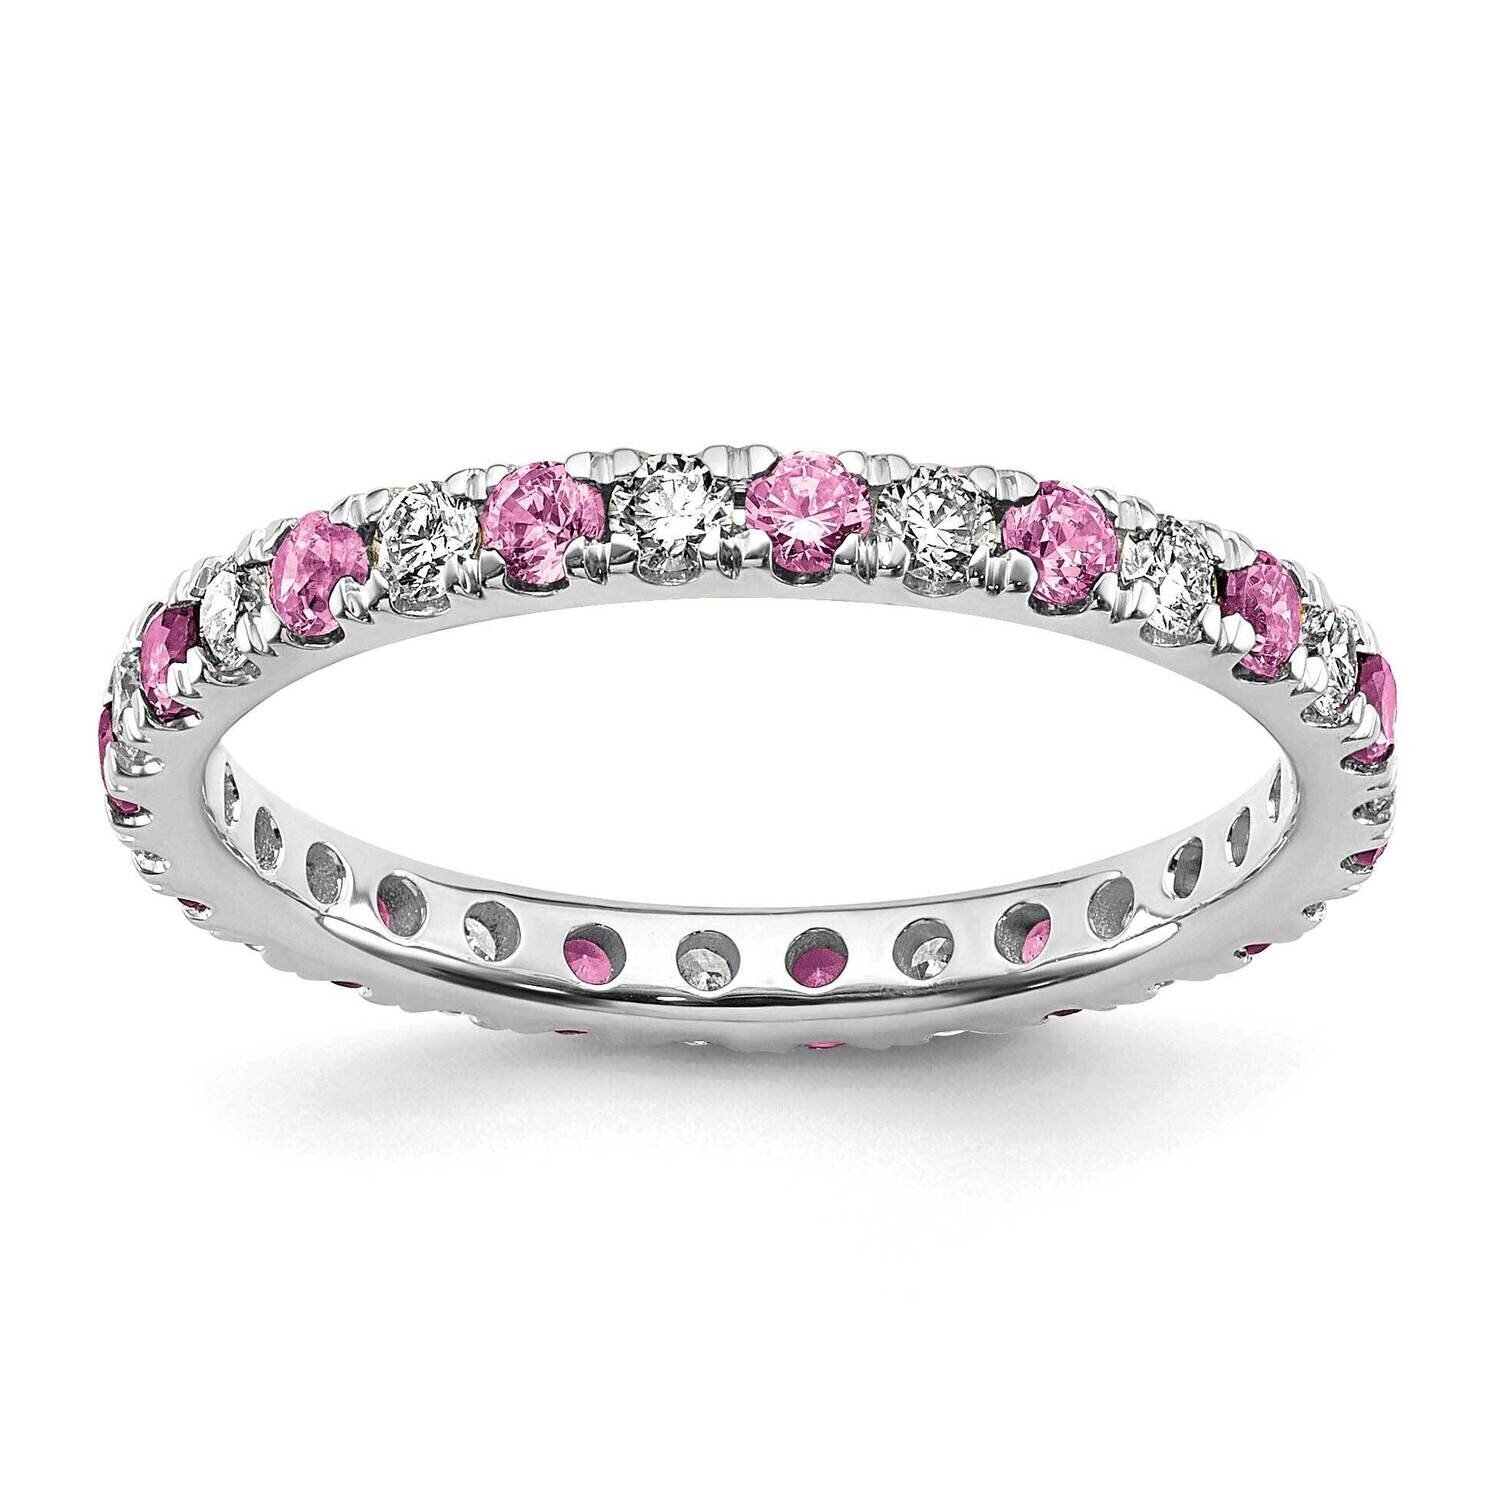 Si1/Si2 G H I & Created Pink Sapphire Eternity Band 14k White Gold Lab Grown Diamond ET0049-CPS-050-9WLG